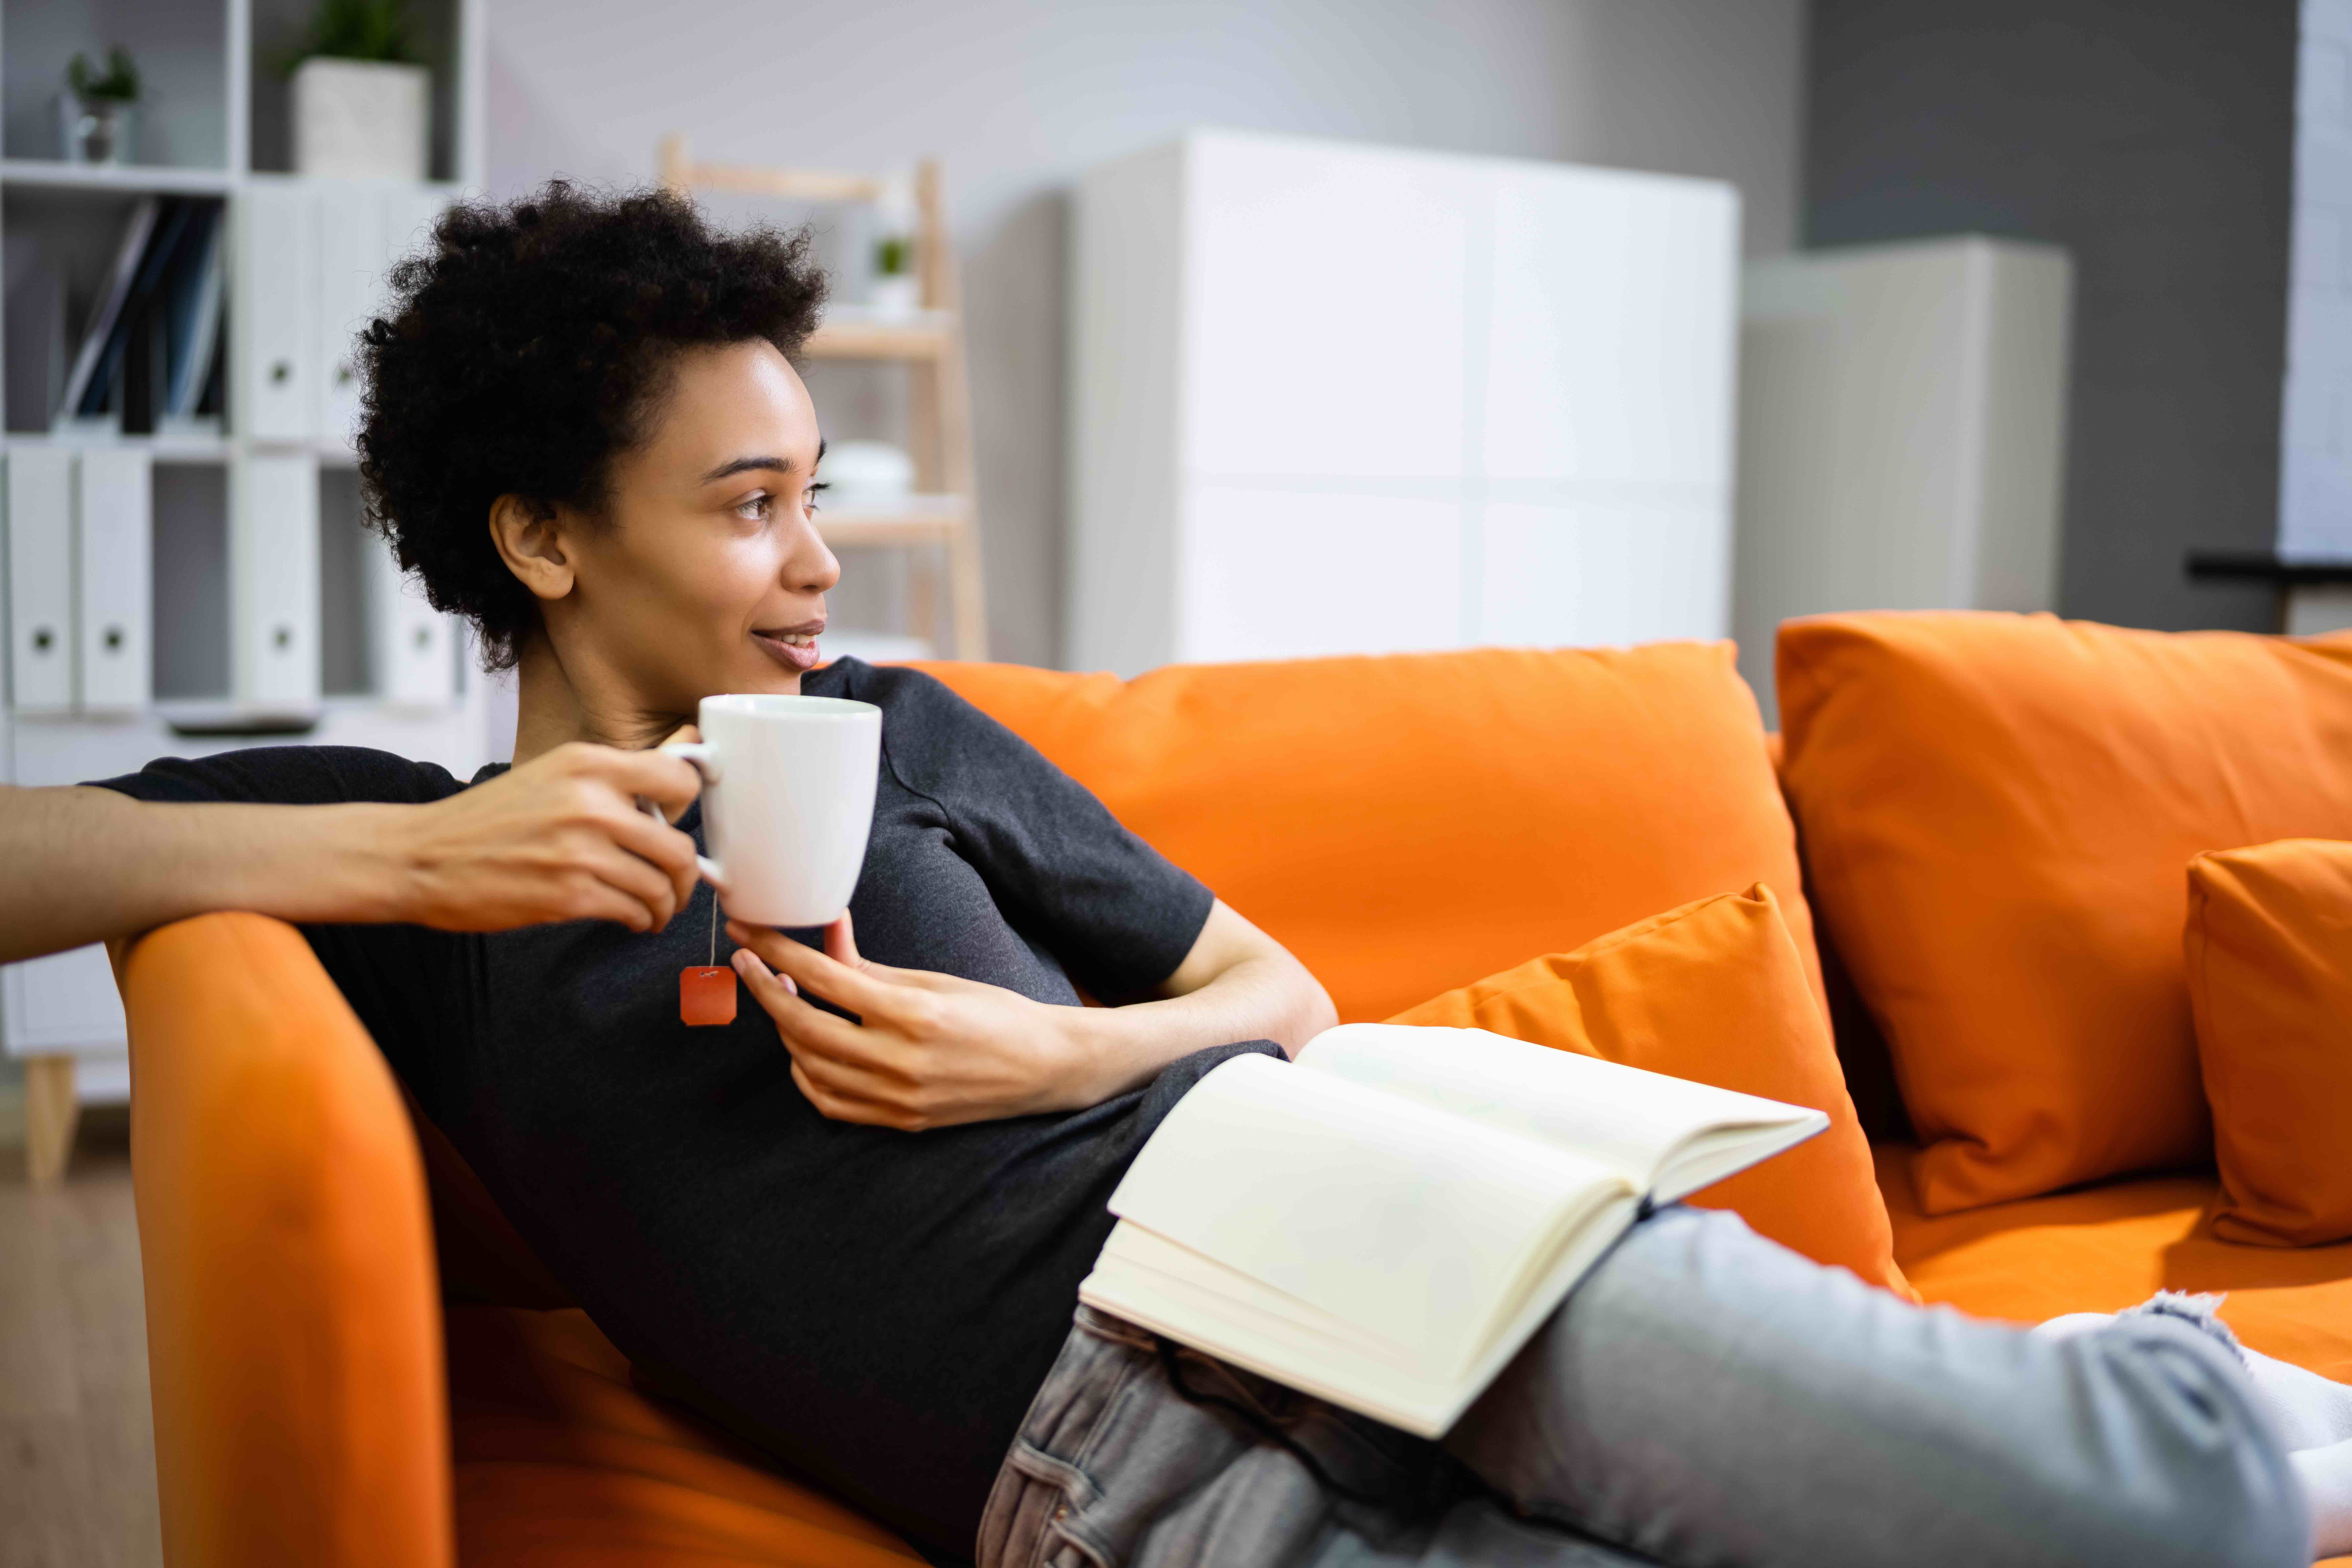 Woman sitting on couch drinking coffee waiting for laundry delivery.jpg